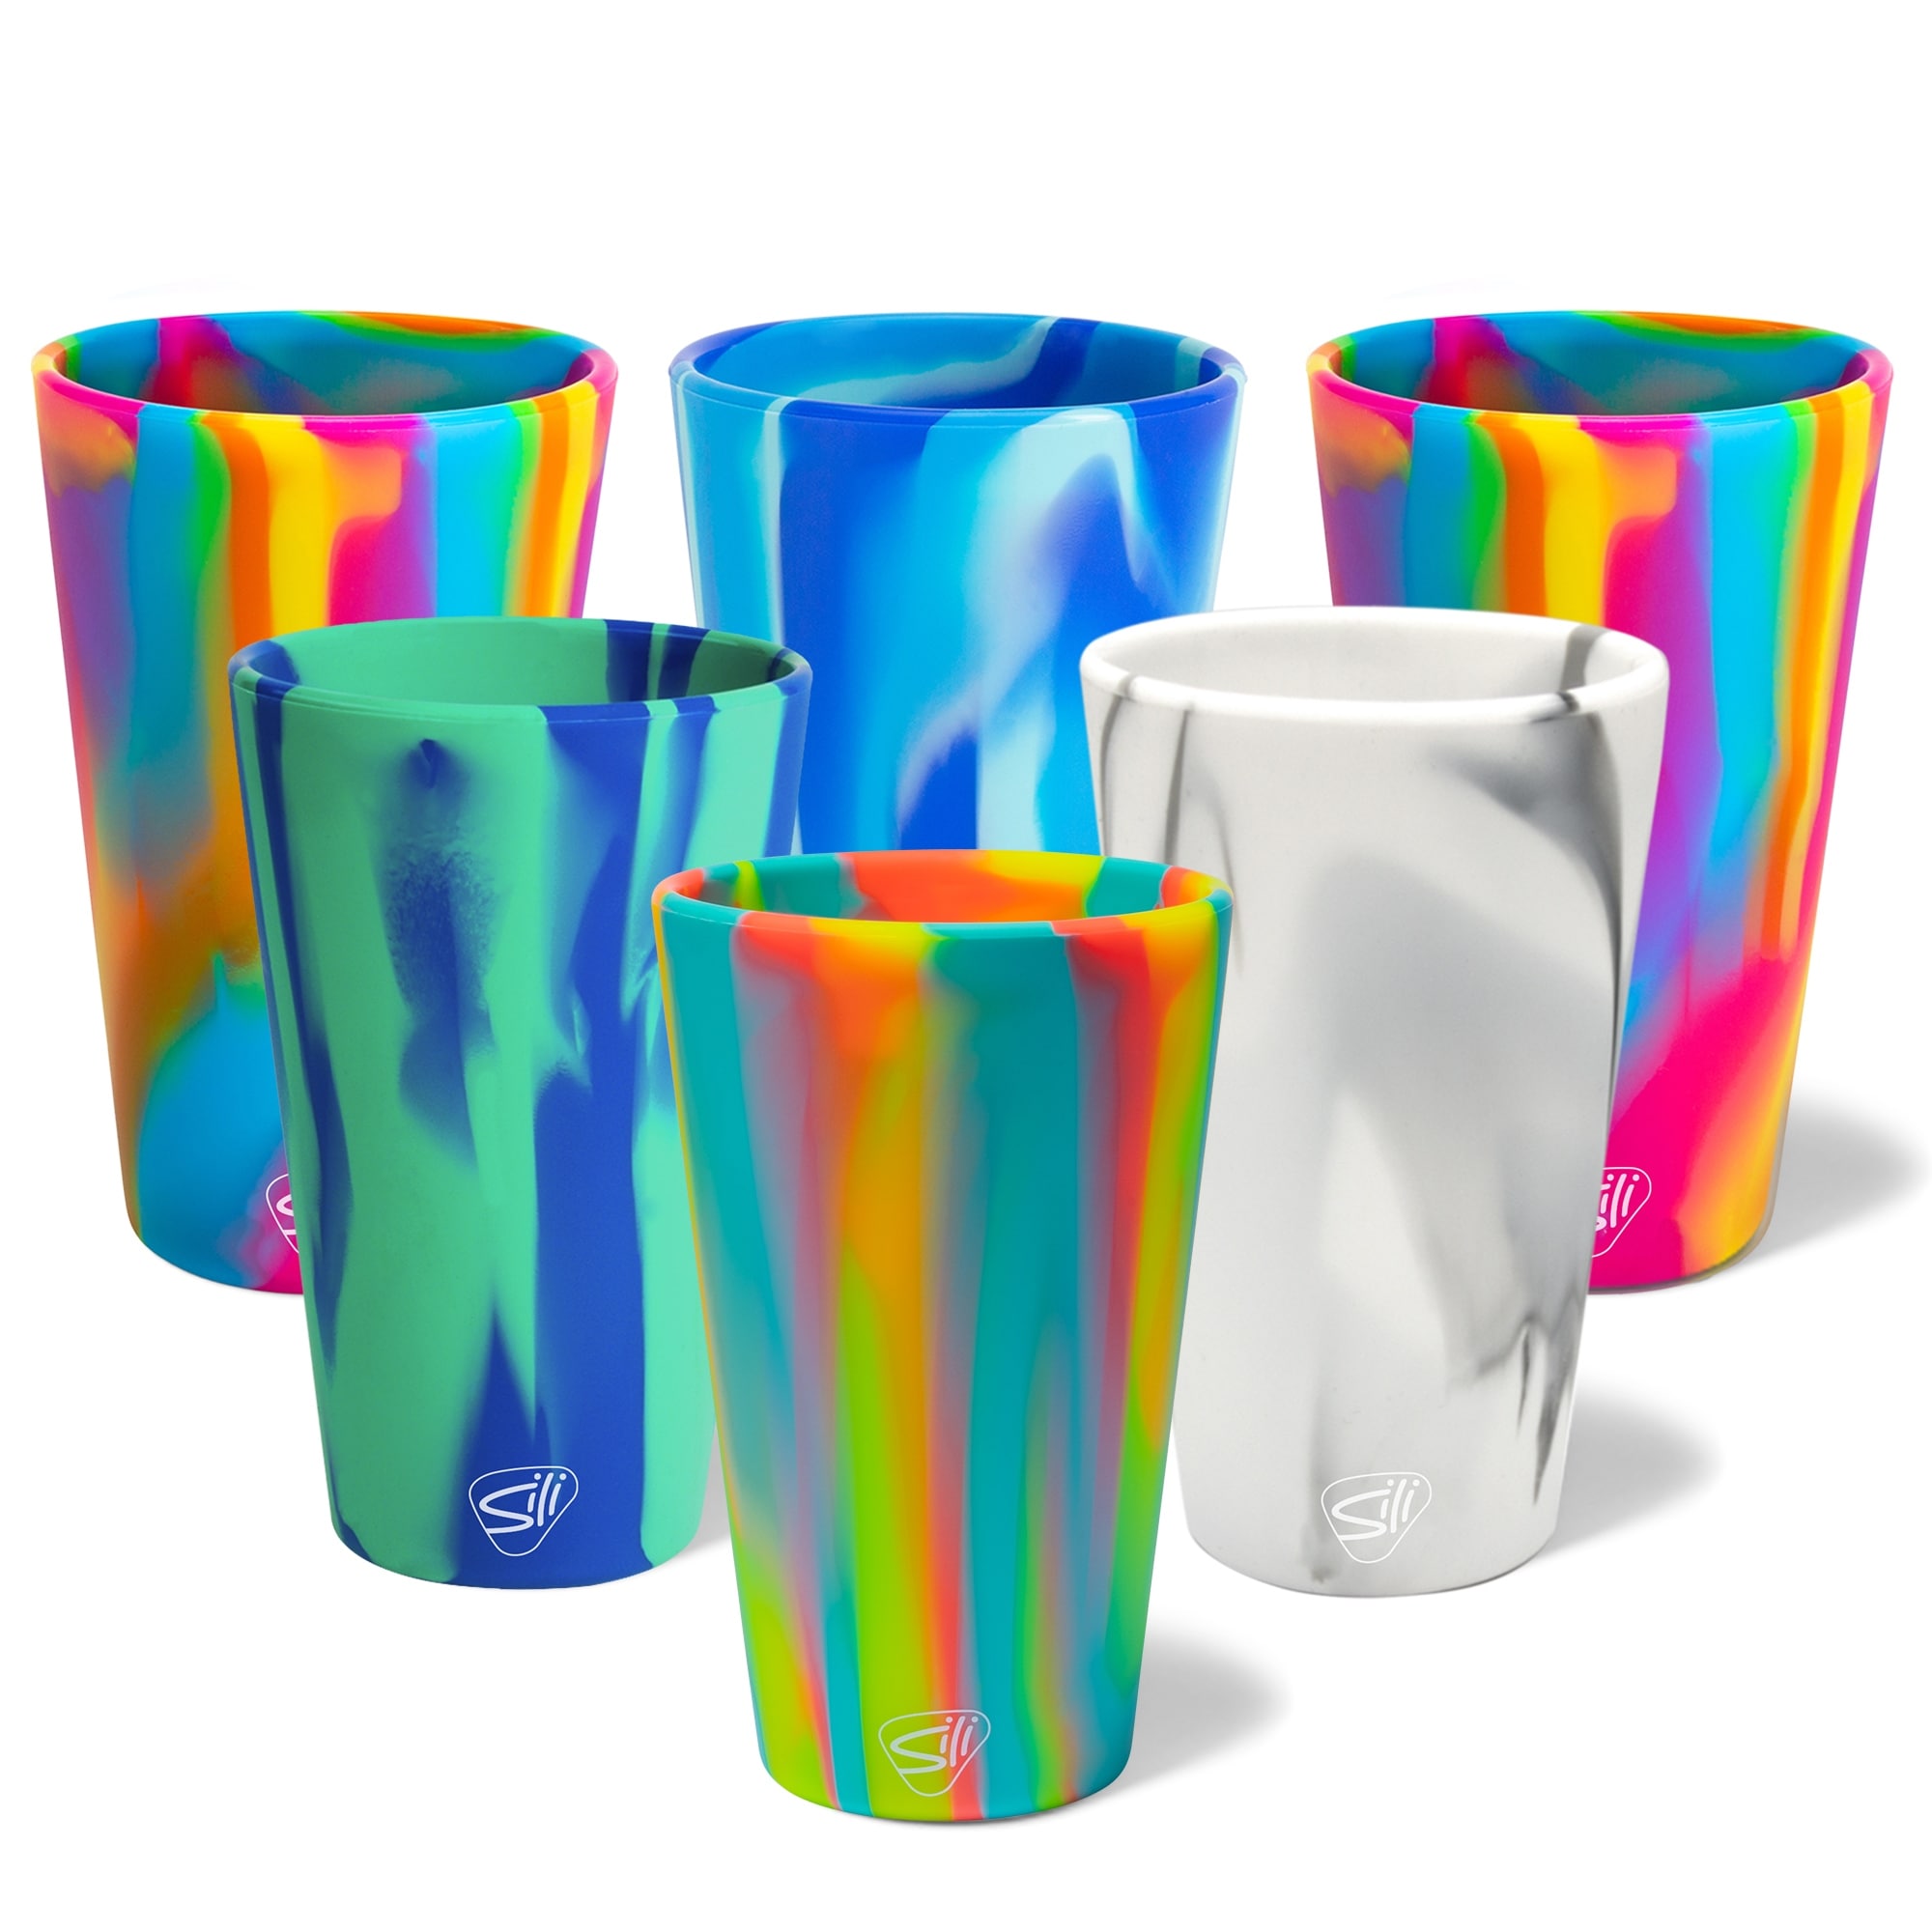 https://ak1.ostkcdn.com/images/products/is/images/direct/1a3e2baceb5e75e61e4c5d398ccfebc68199e2dc/Silipint-Silicone-Pint-Glasses%3A-6-Pack--Sugar-Rush%2C-Headwaters%2C-Mtn-Marble%2C-Artic-Sky%2C-2-Hippie-Hops--Unbreakable-Cups.jpg